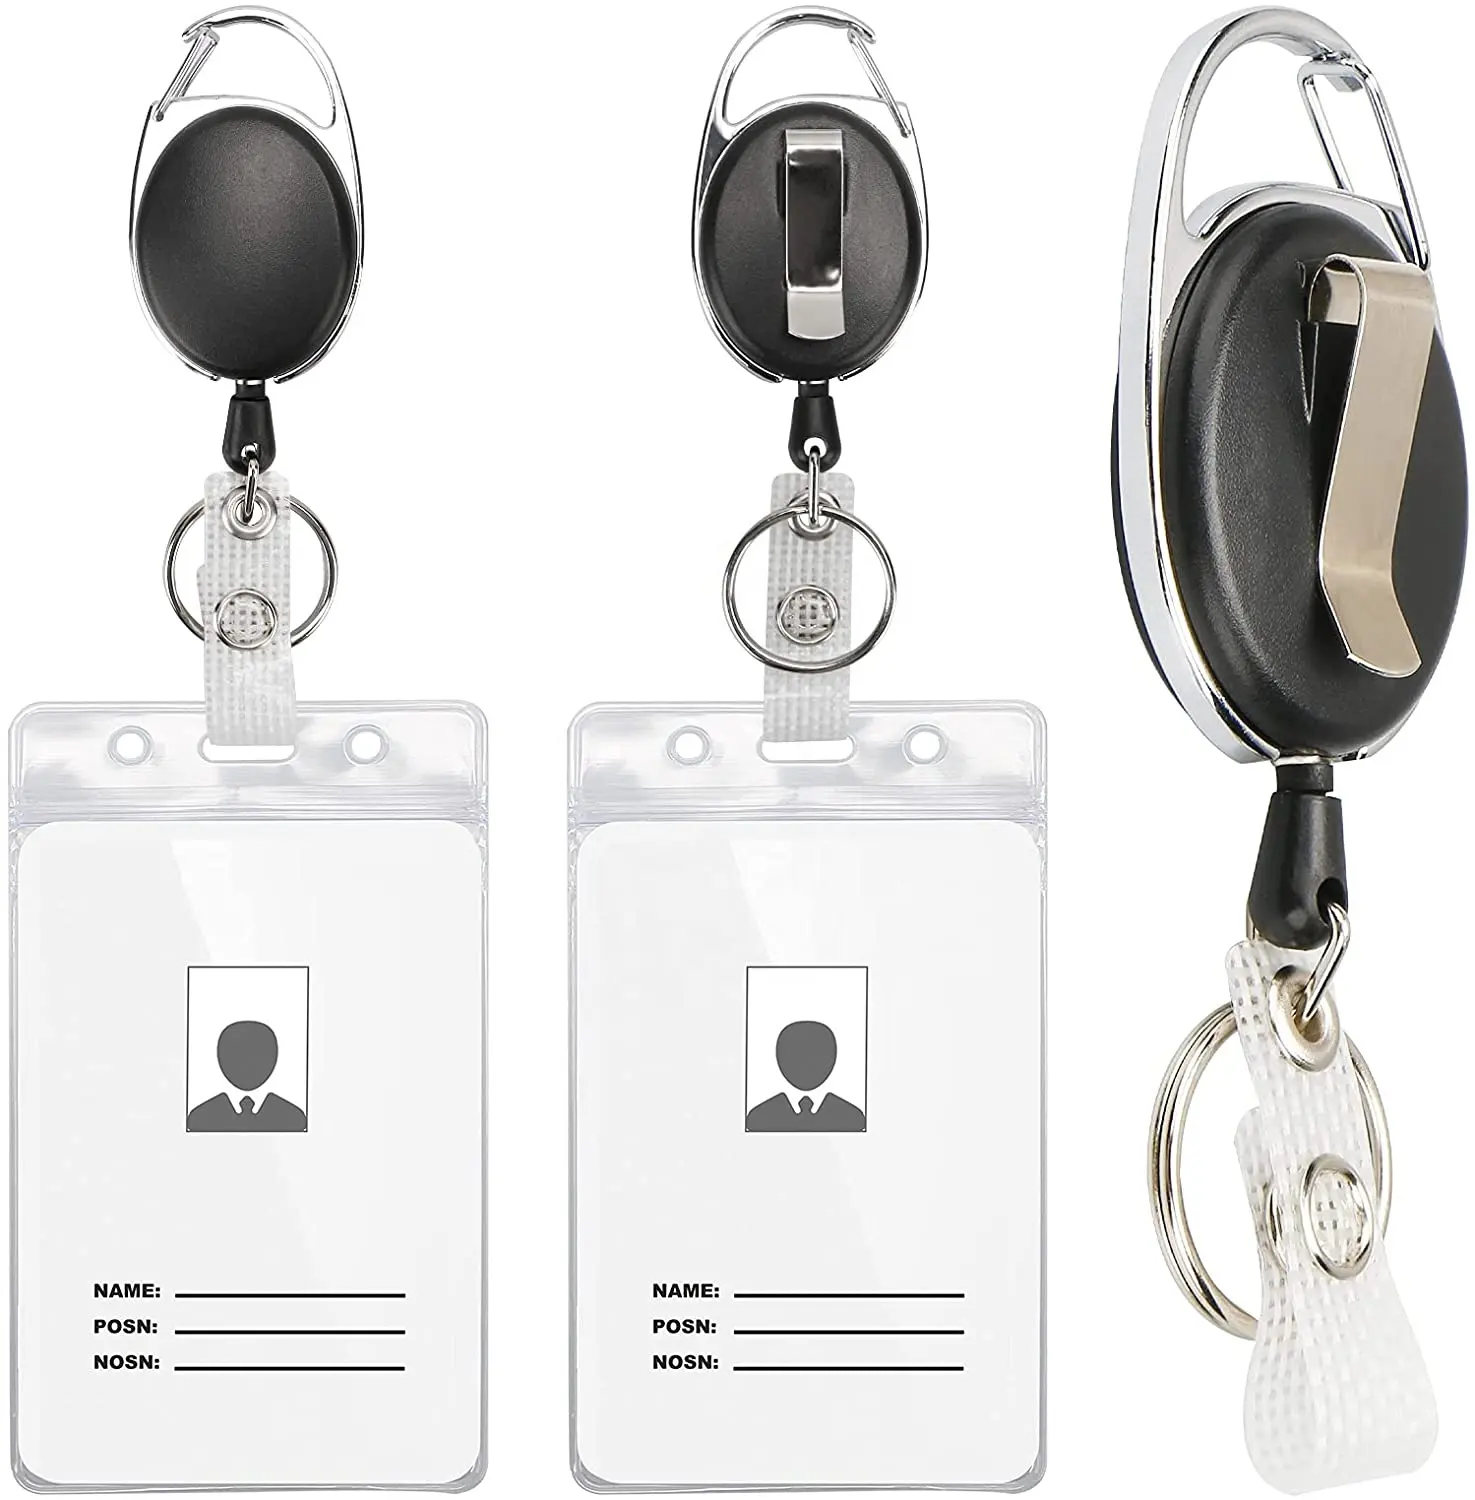 High quality Plastic&Metal Retractable Badge Reel Holders with Id Card Holder